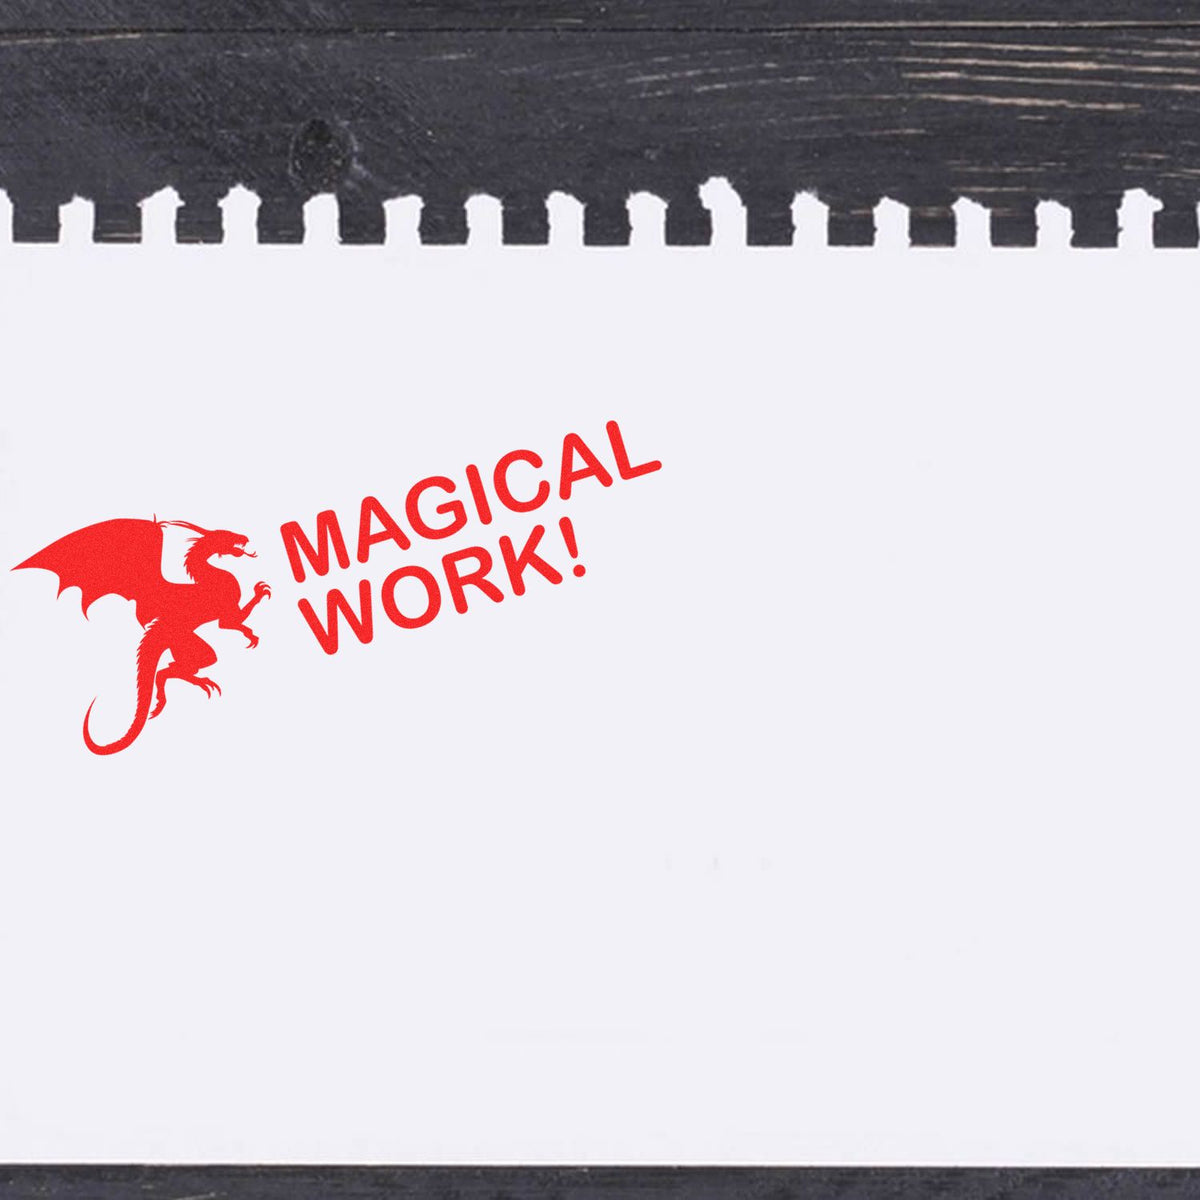 Self-Inking Dragon Magical Work Stamp In Use Photo